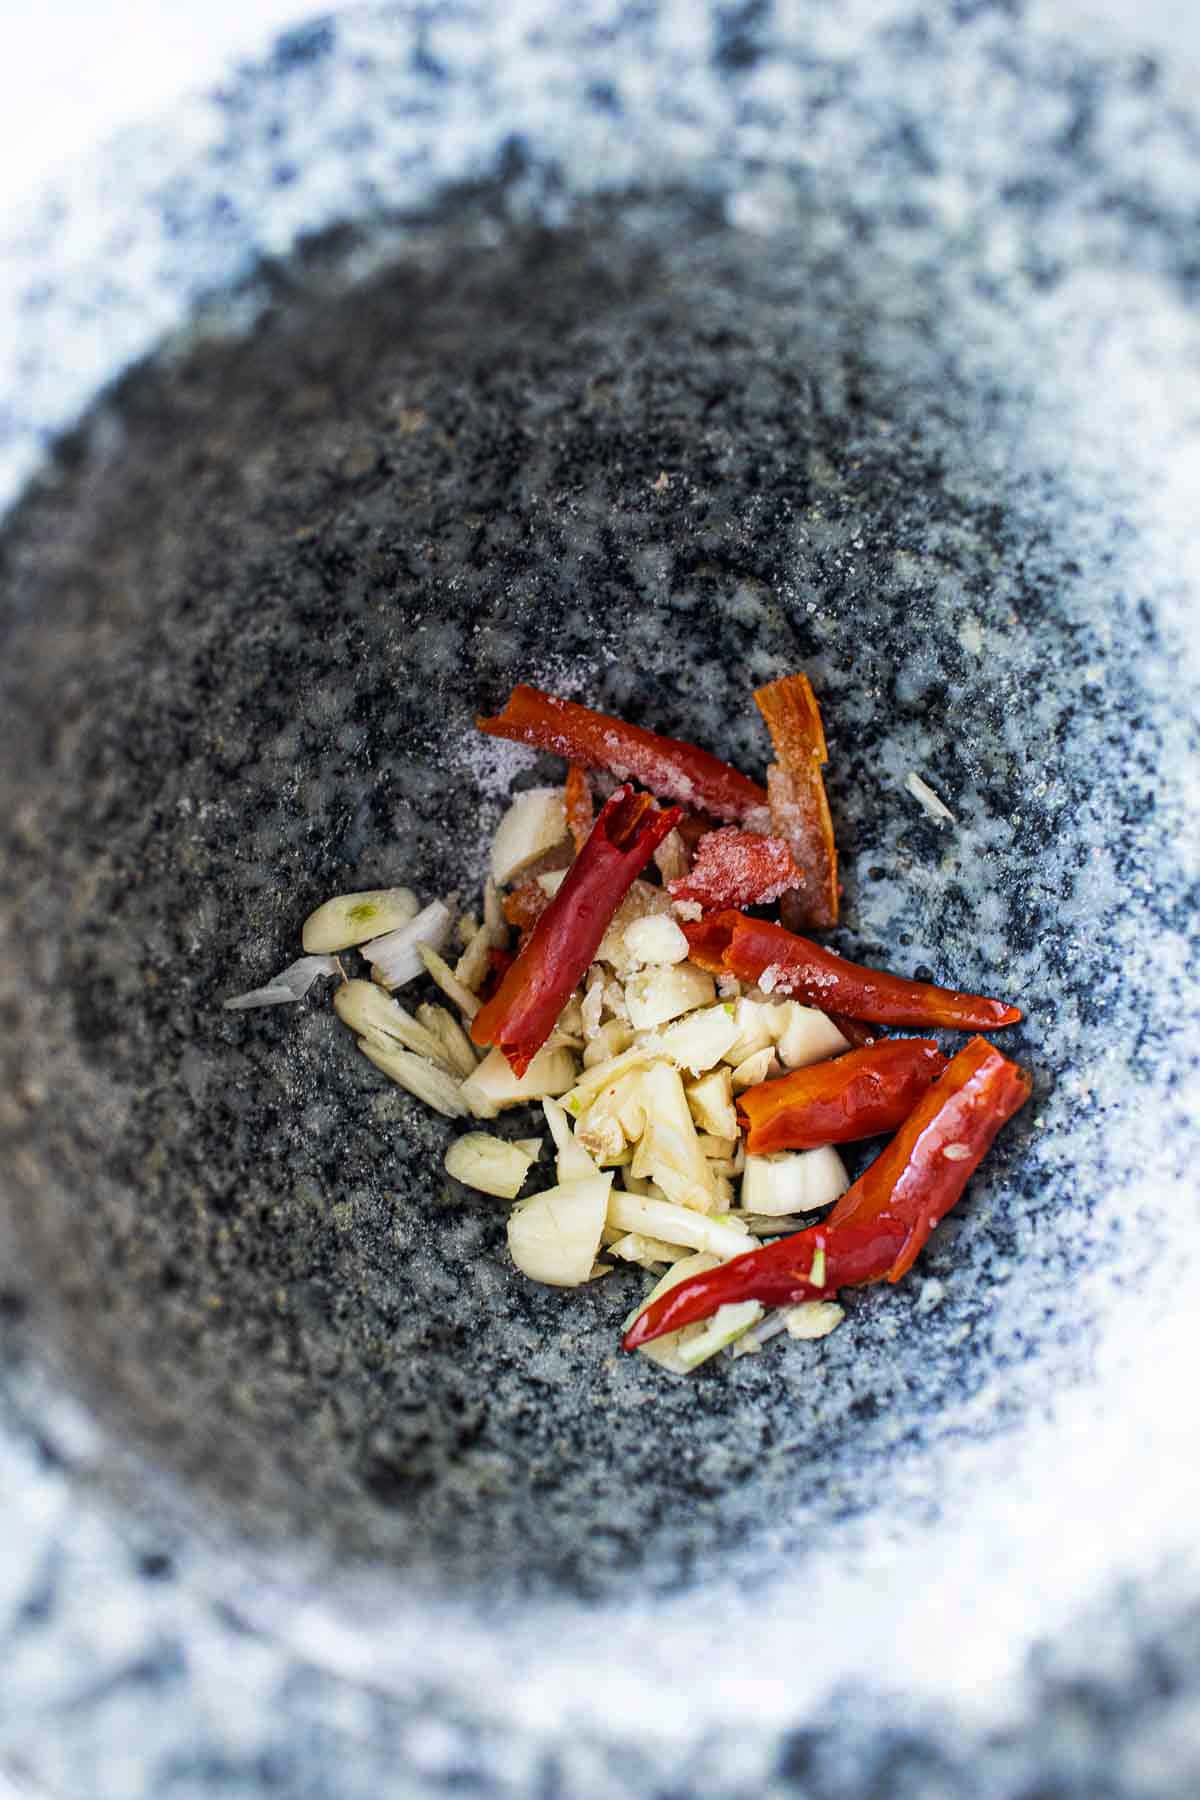 chilis, garlic and salt in stone mortar for making curry paste